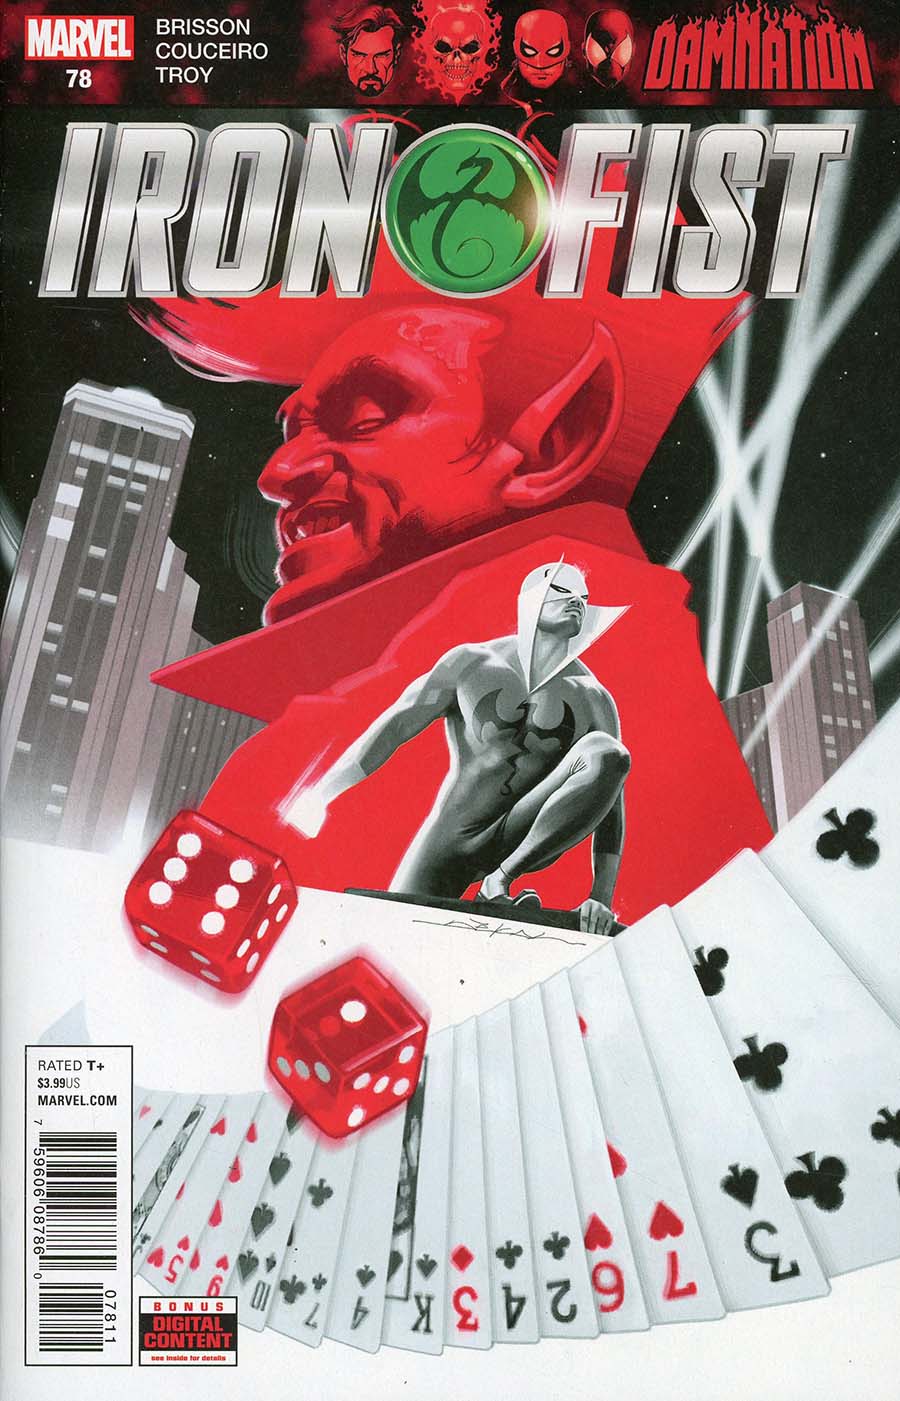 Iron Fist Vol 5 #78 (Damnation Tie-In)(Marvel Legacy Tie-In)